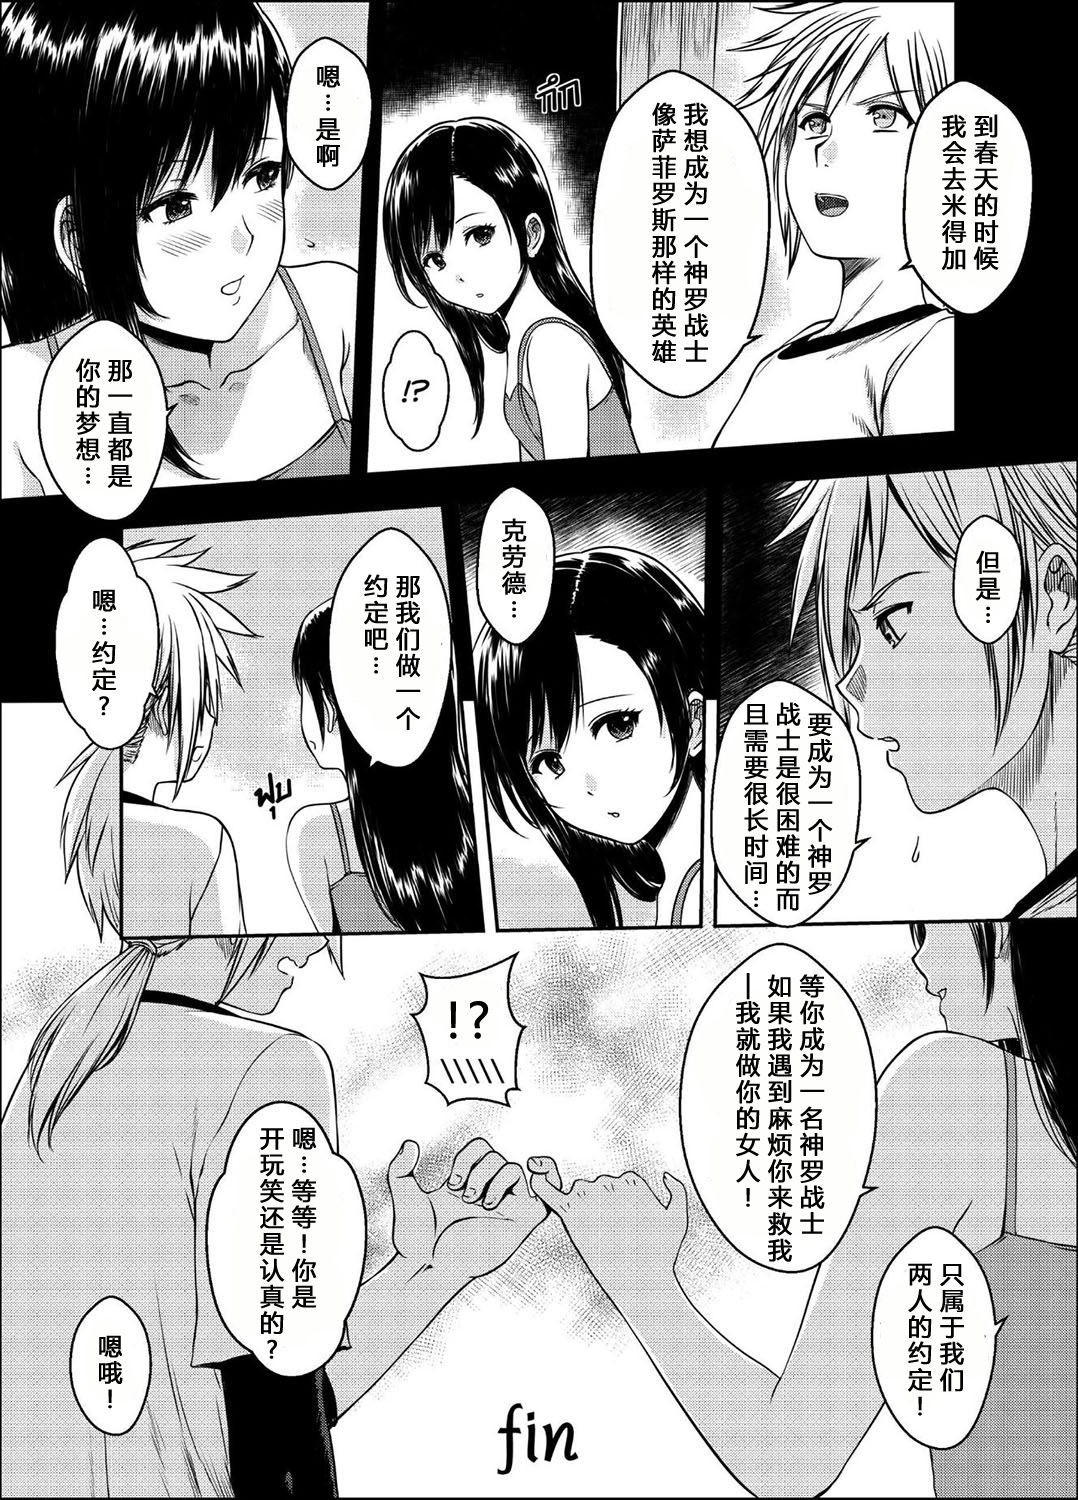 [XTER] OUR [X] PROMISE (Final Fantasy VII) [汉化] page 27 full